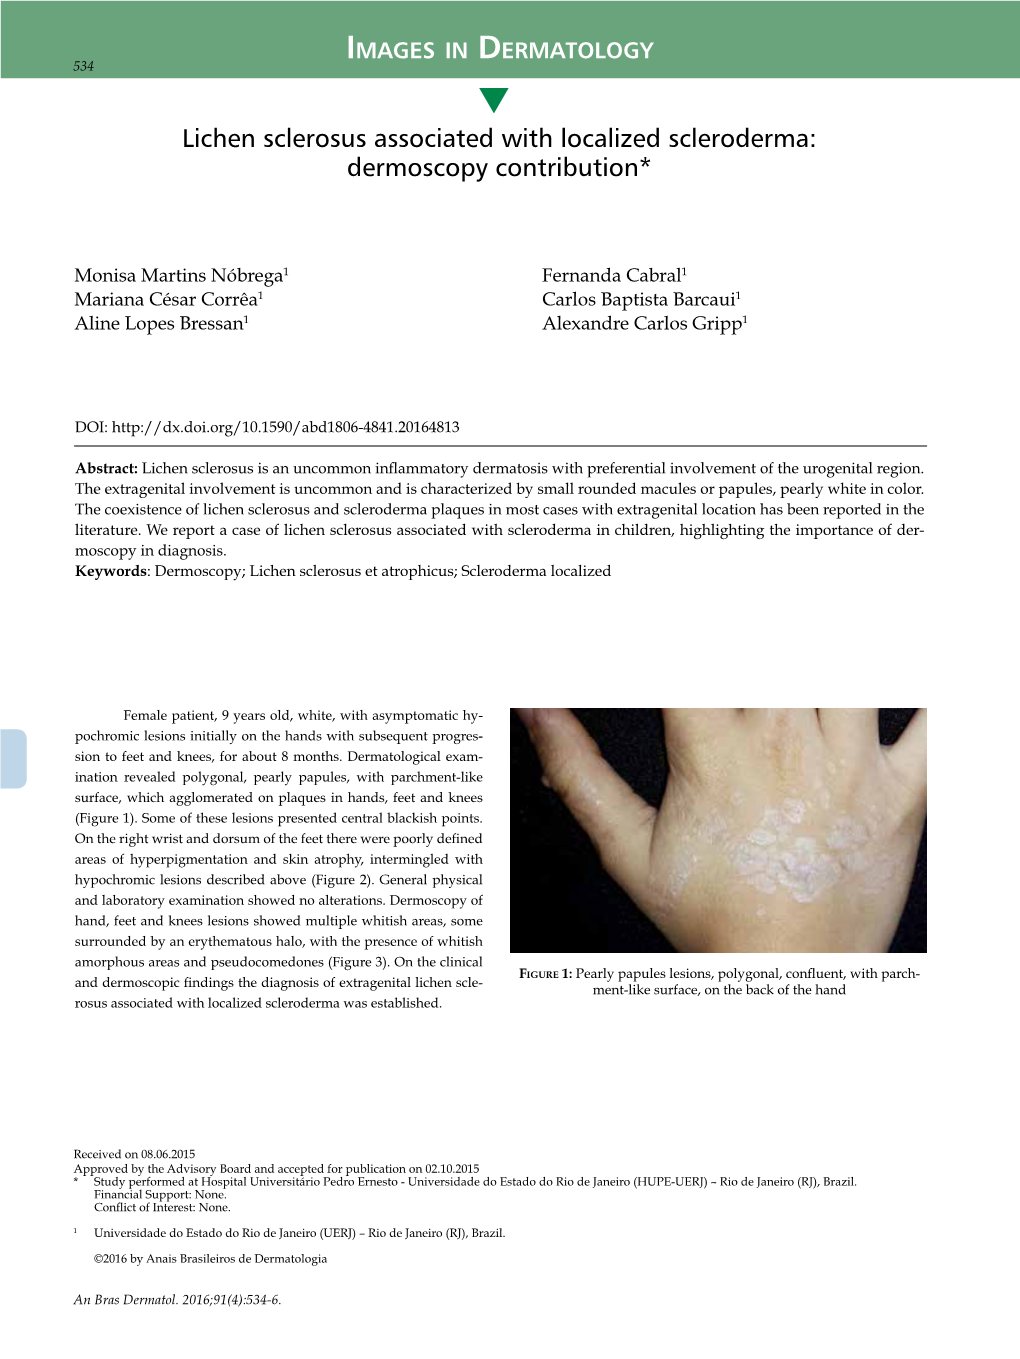 Lichen Sclerosus Associated with Localized Scleroderma: Dermoscopy Contribution*